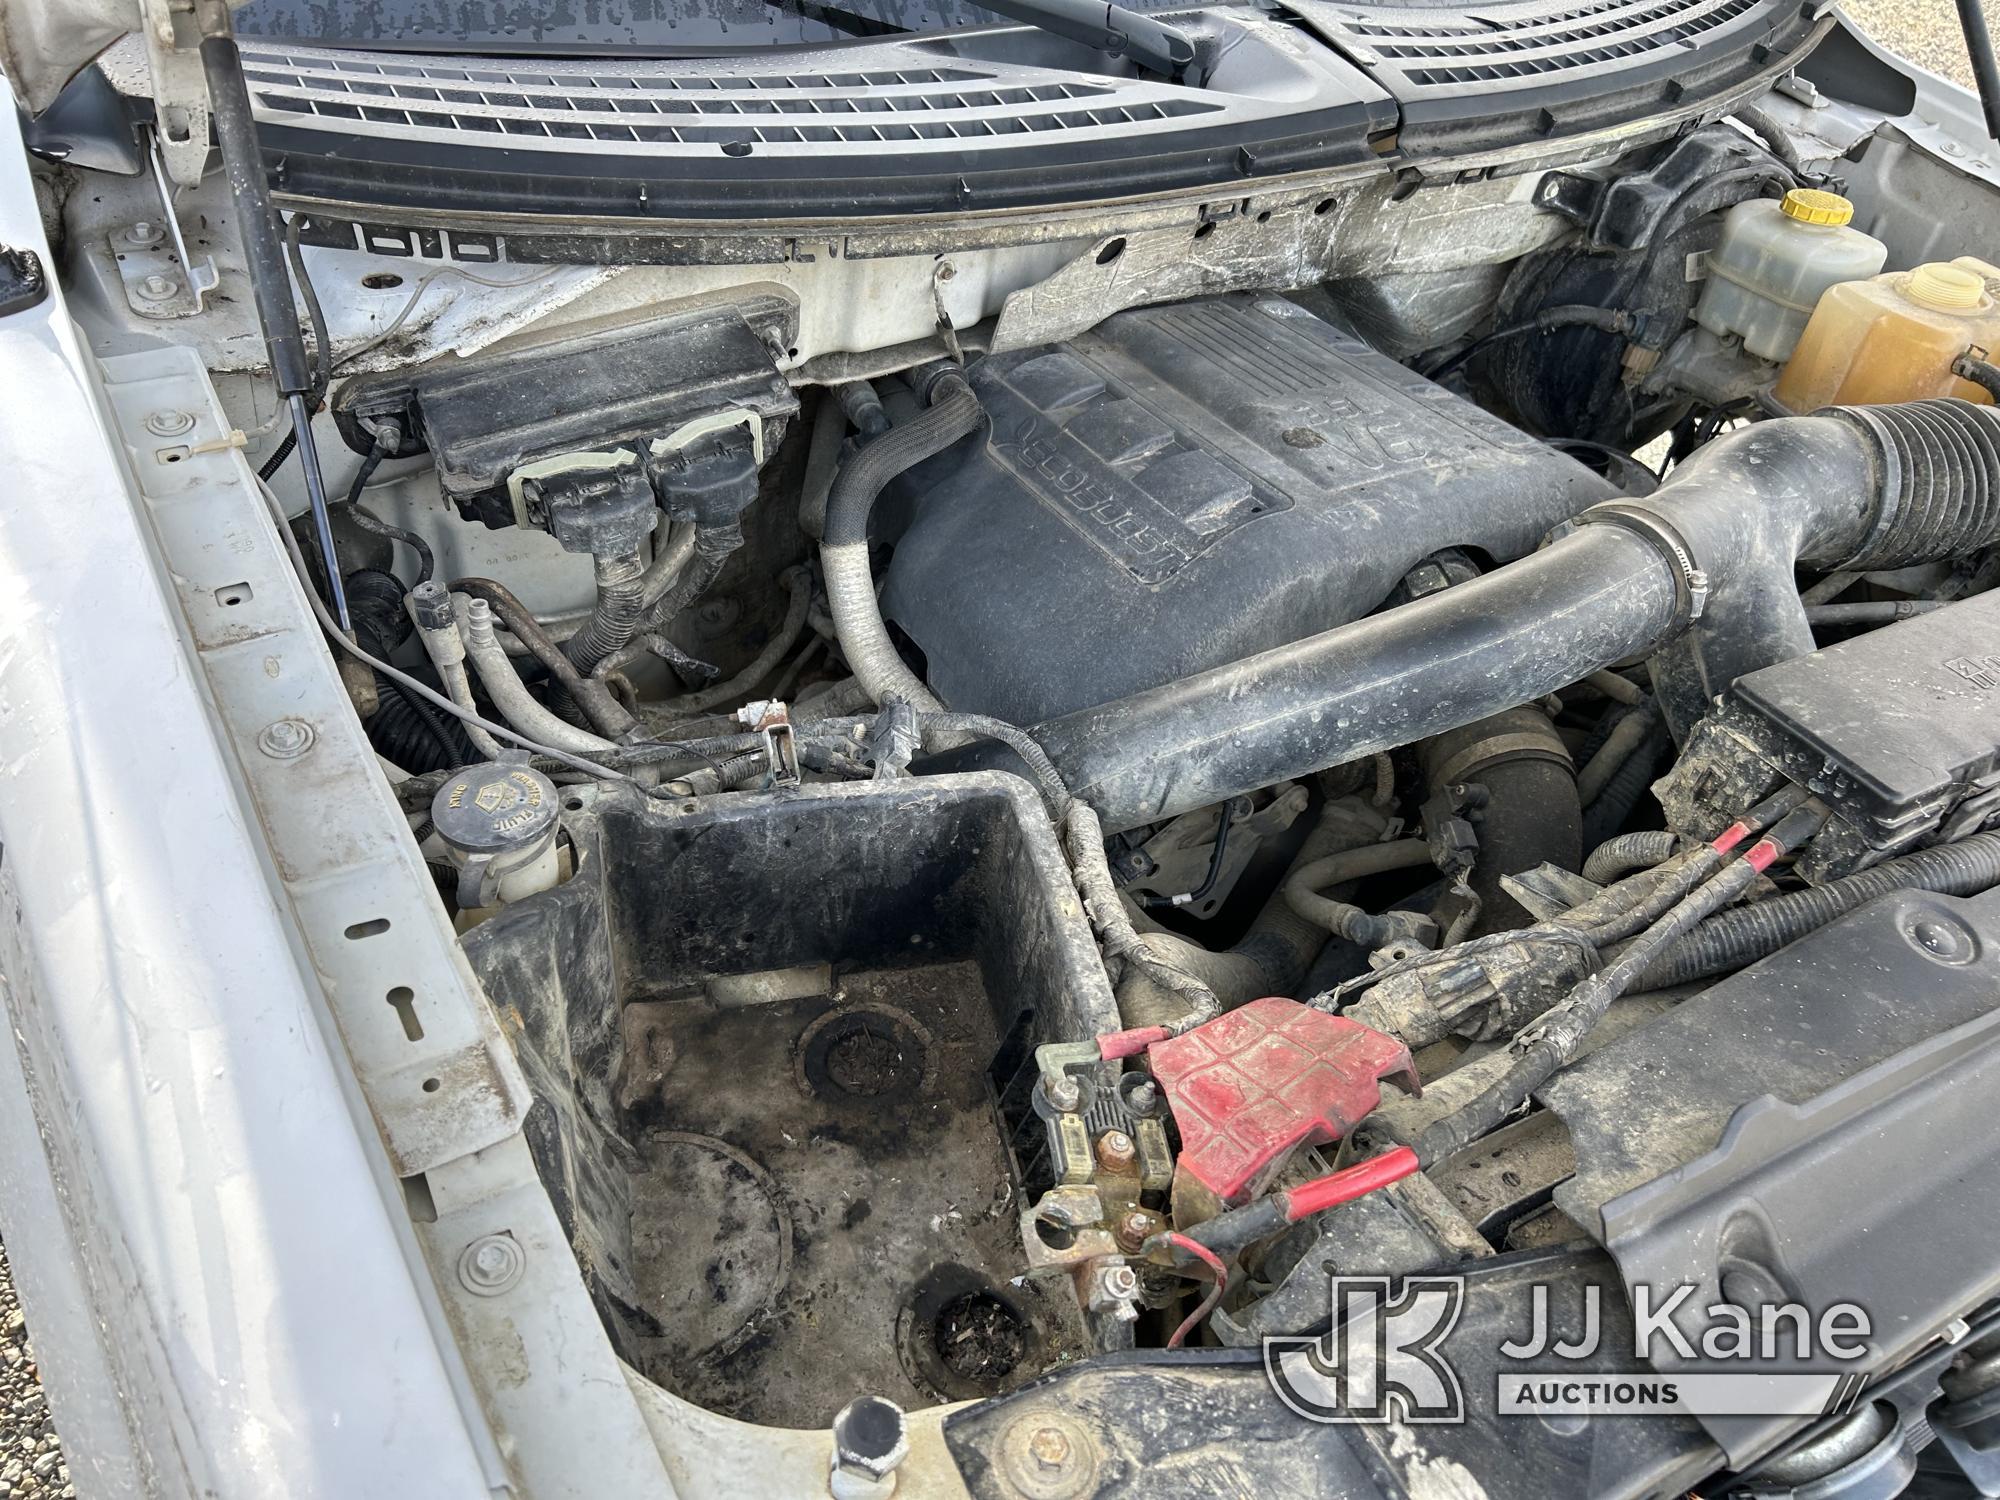 (Hagerstown, MD) 2014 Ford F150 4x4 Extended-Cab Pickup Truck Not Running, Missing Battery, Conditio